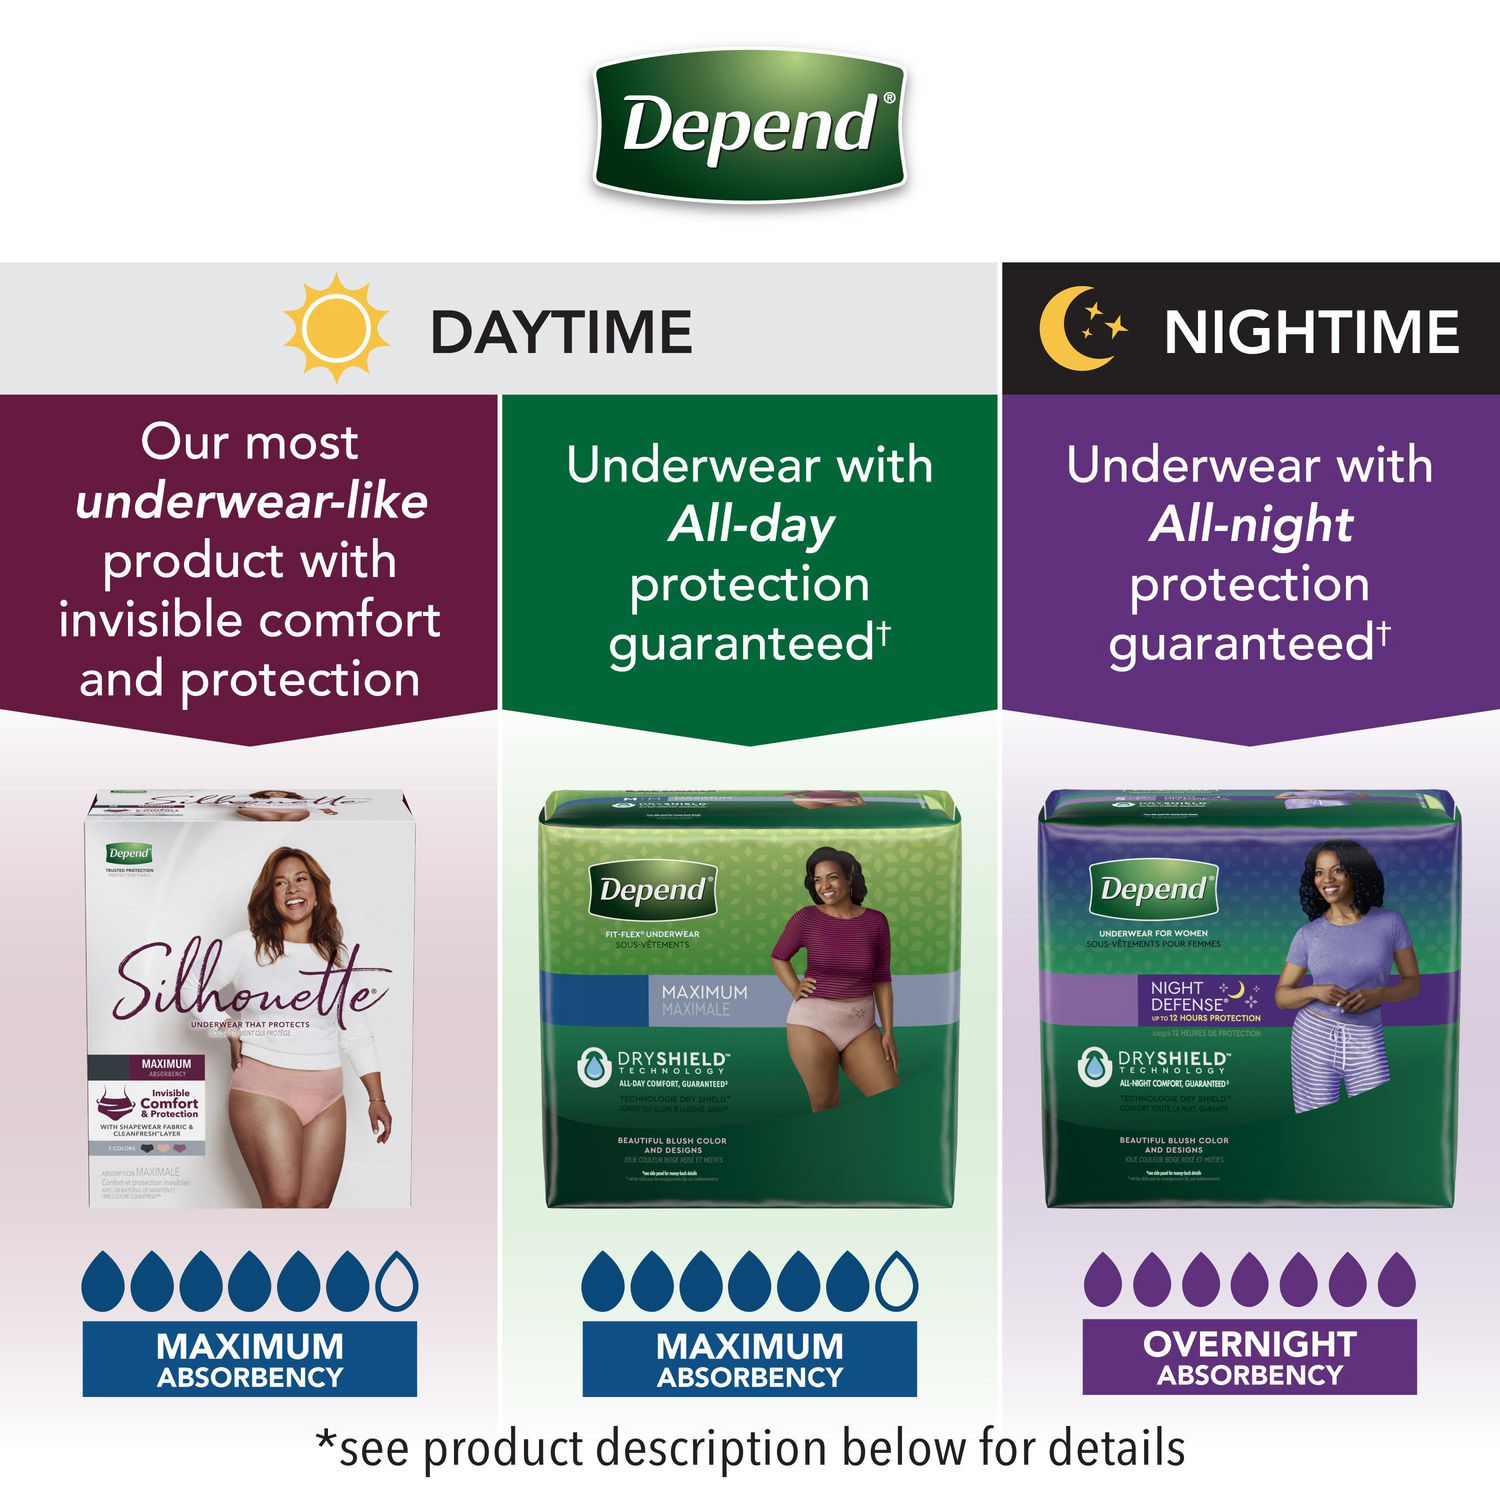 Depend Night Defense Adult Incontinence Disposable Overnight Size XL Blush  Underwear For Women, 12 count - Harris Teeter